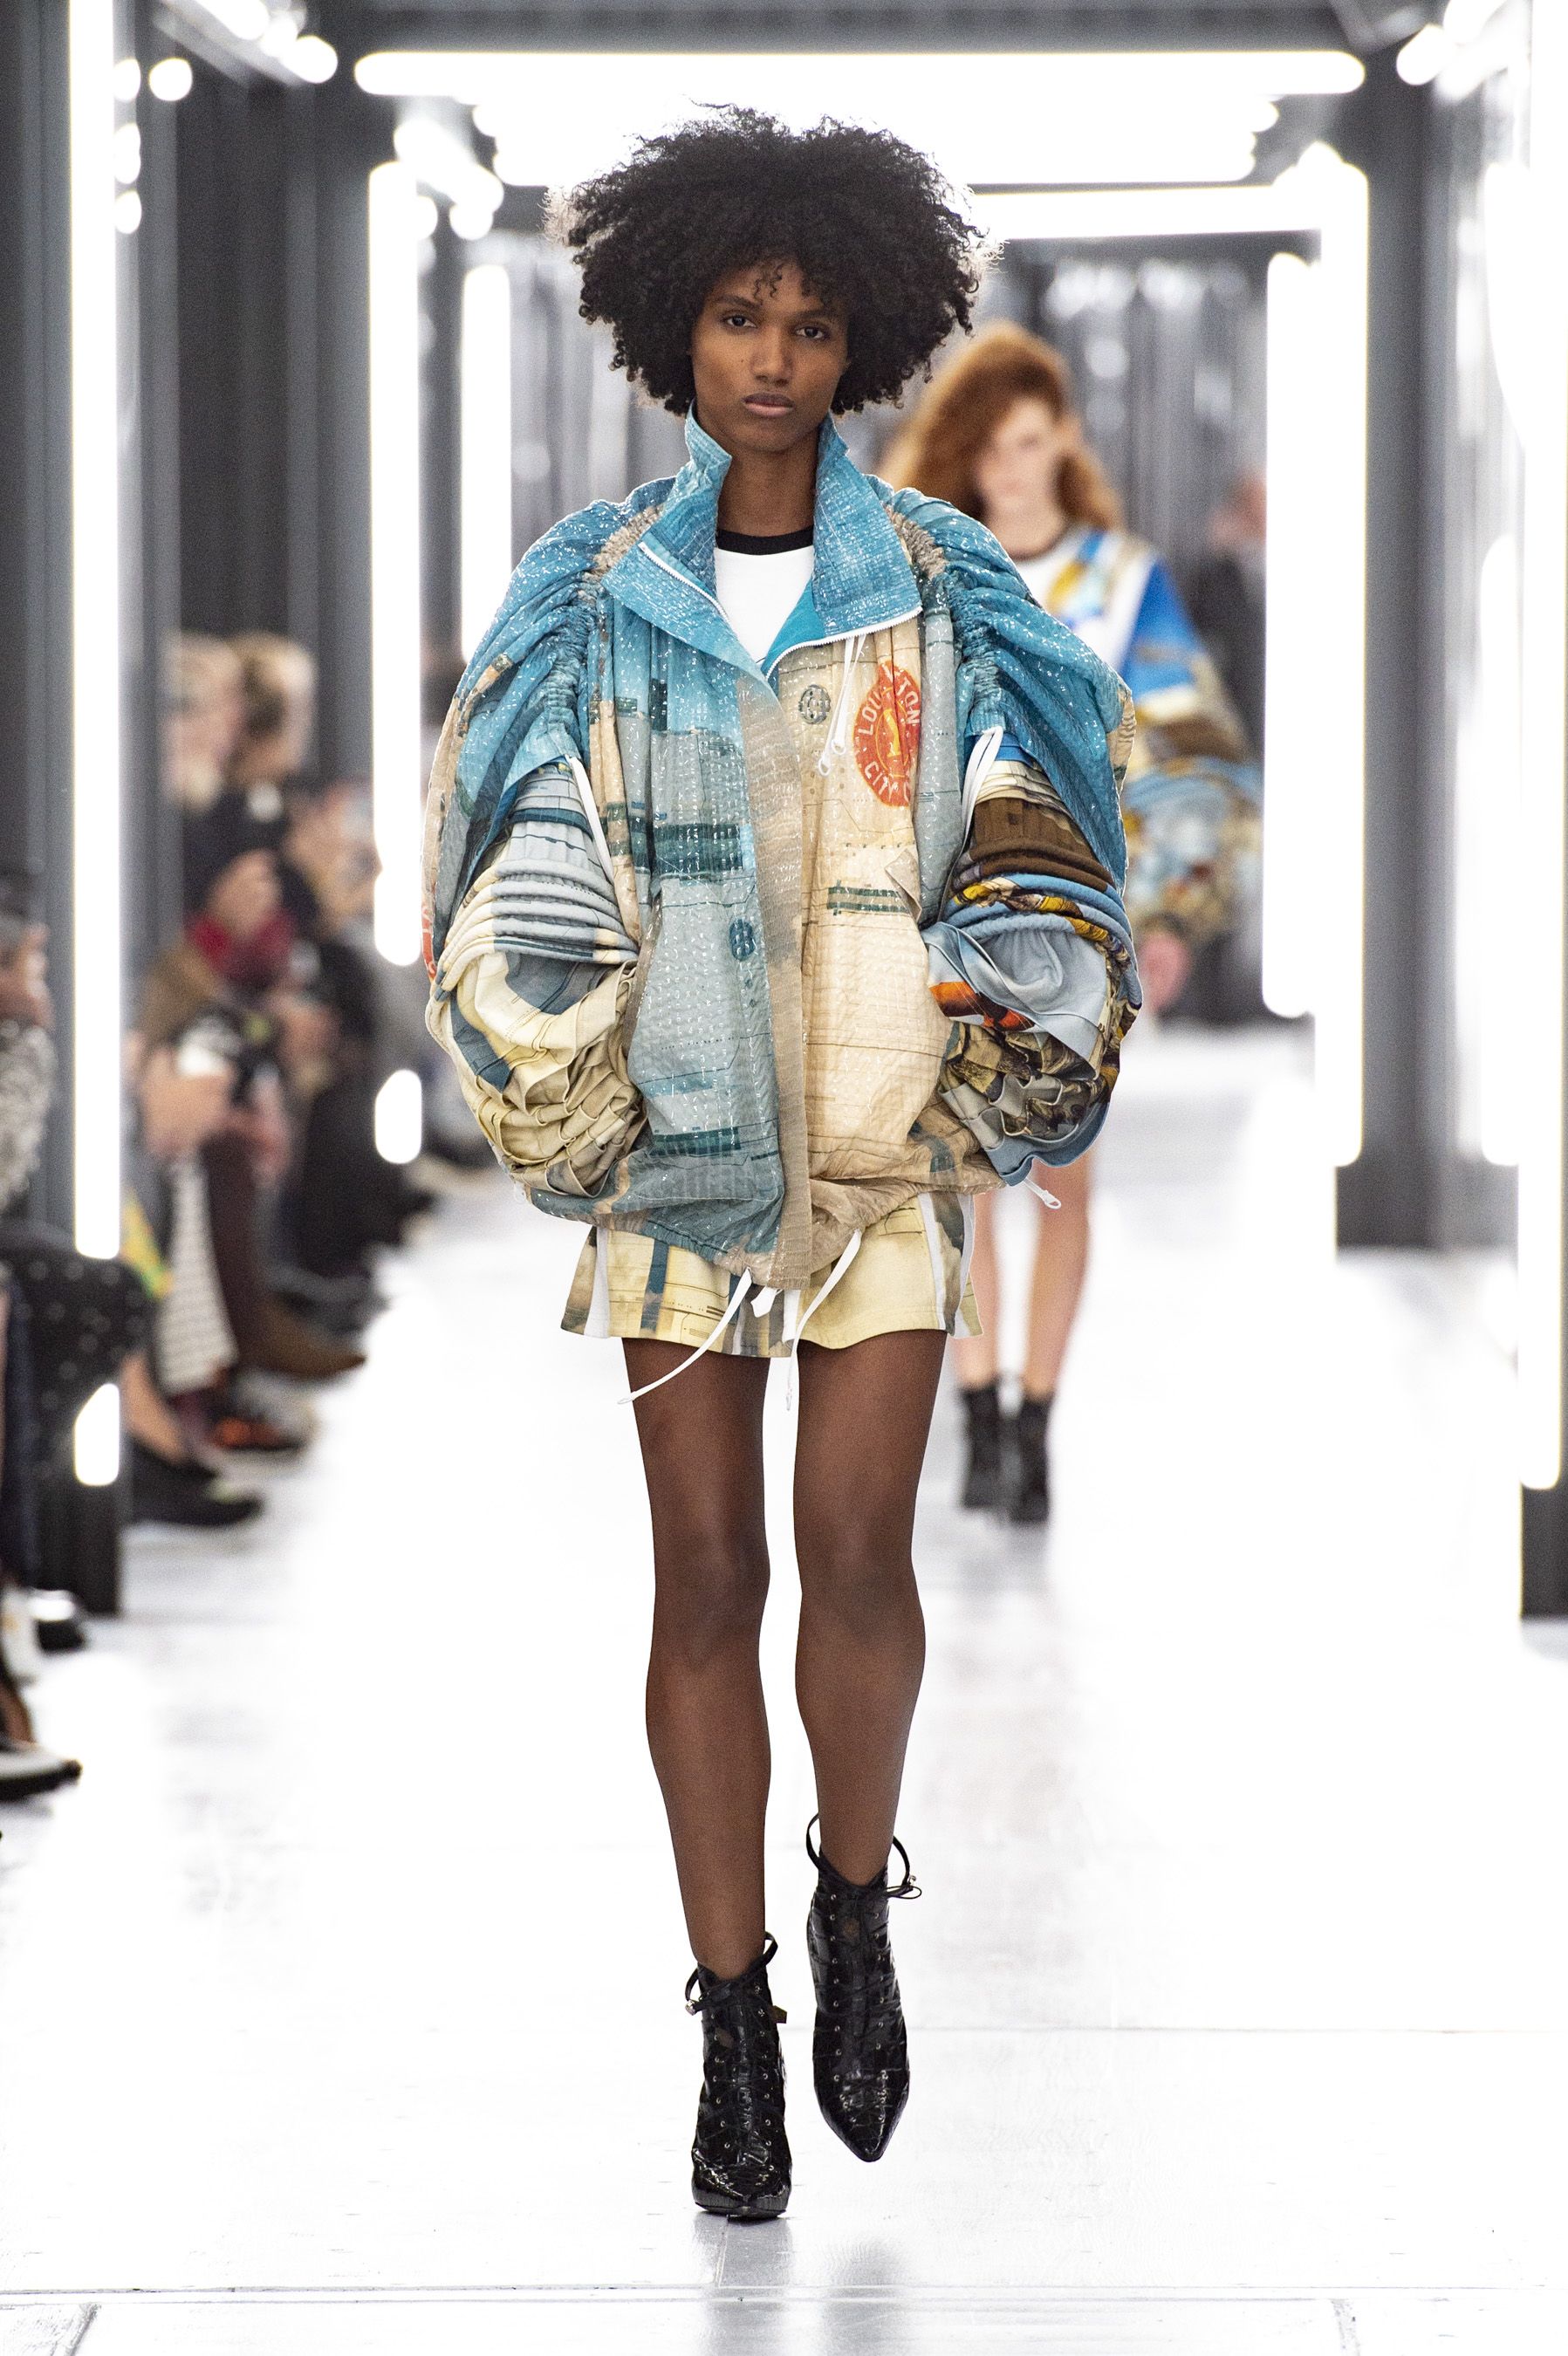 Louis Vuitton goes Afrocentric and hipster chic for S/S 2010